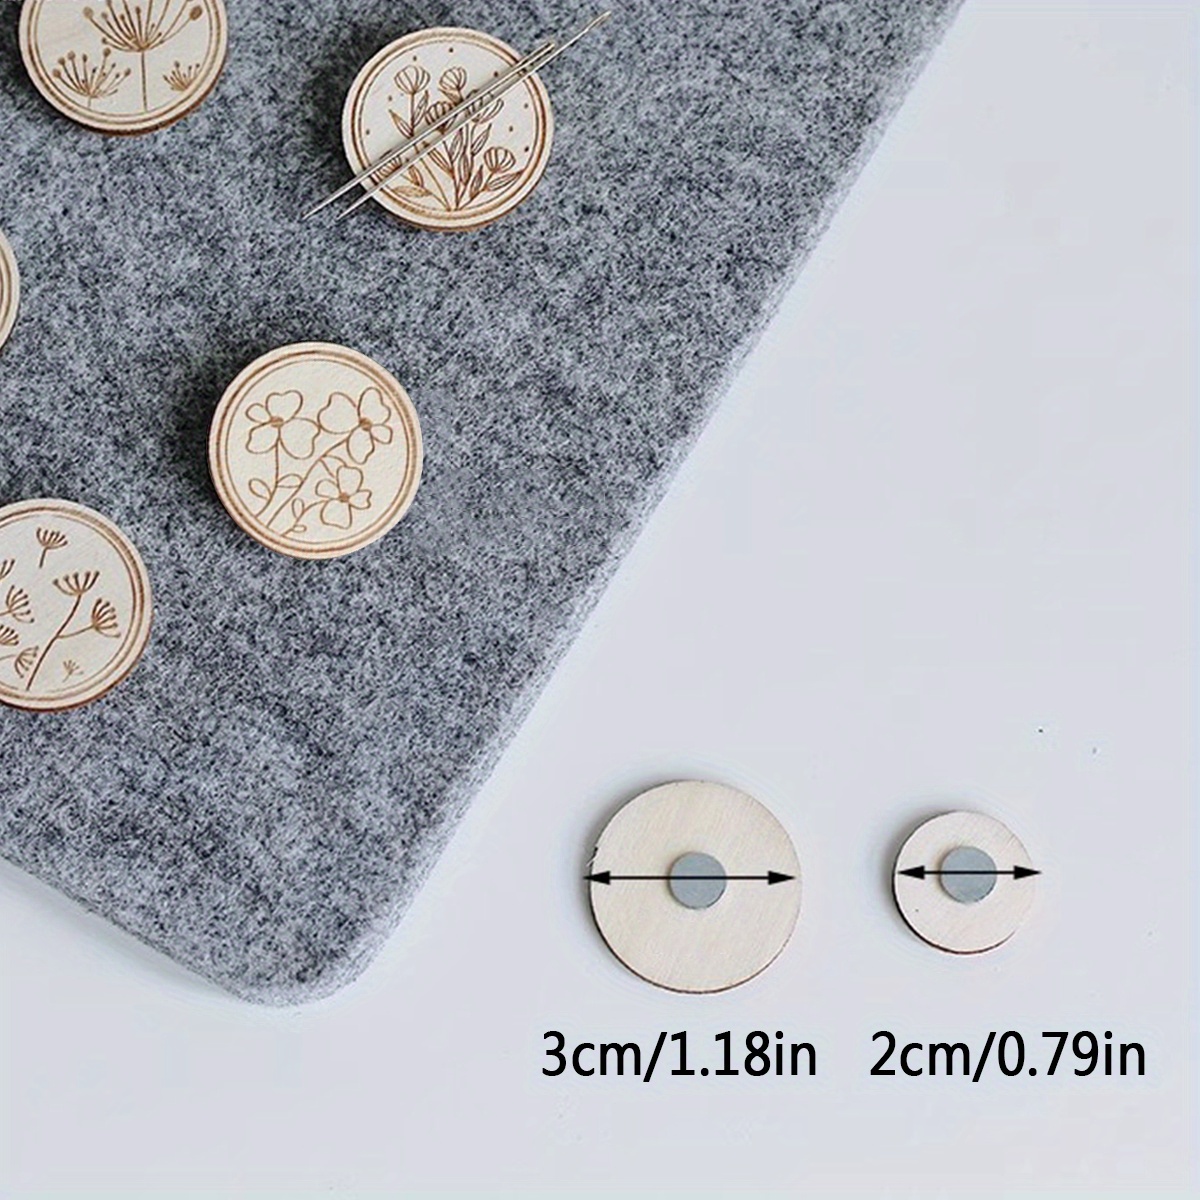 D.I.Y. magnetic pin cushion/findings holder